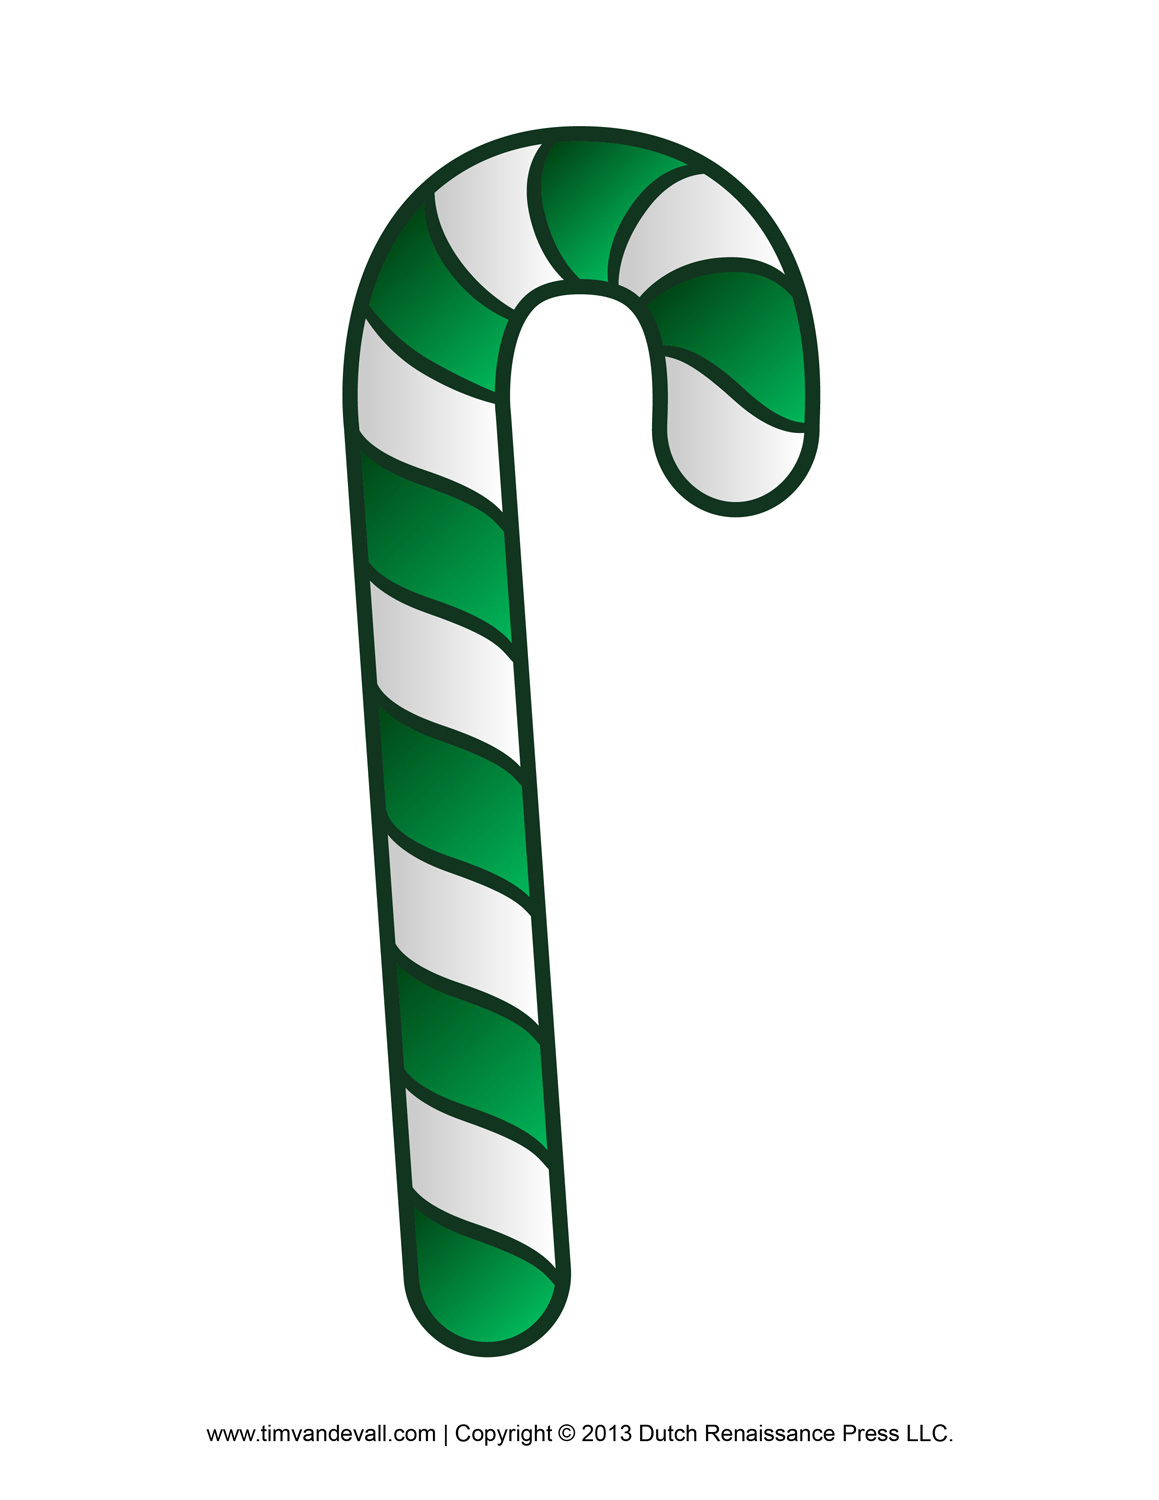 Green Candy Cane